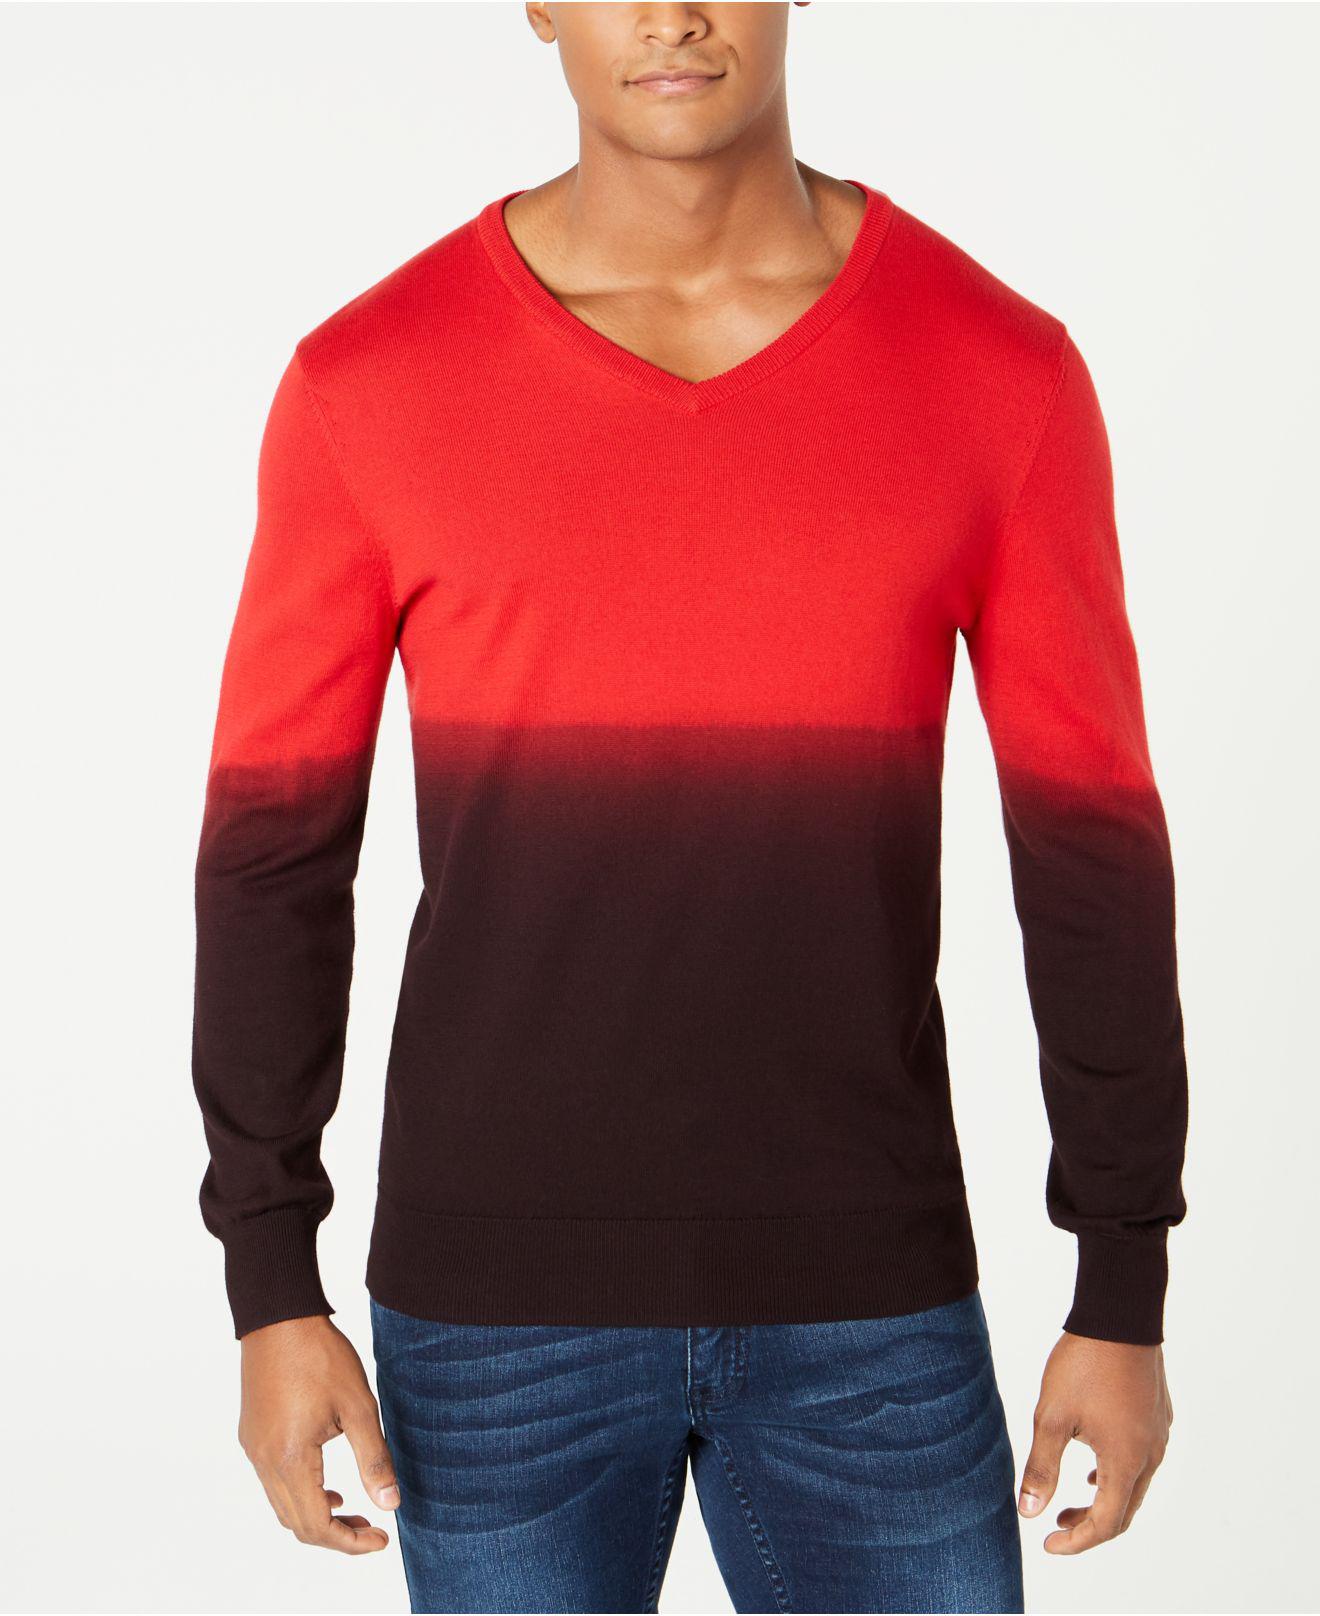 FLCH+YIGE Mens Casual Pullover Sweaters Crew Neck Long Sleeve Knit Sweater 